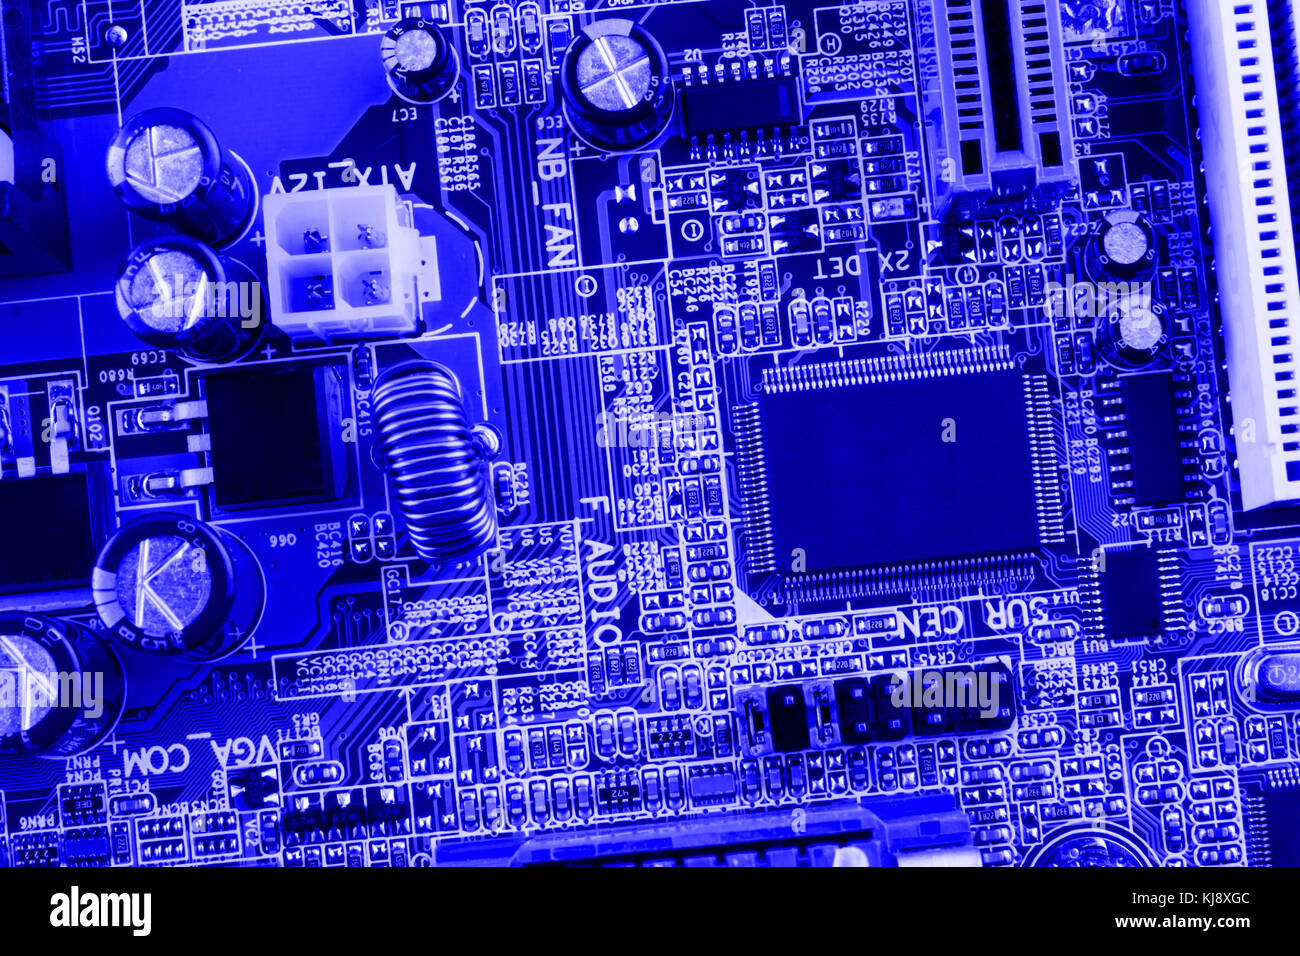 Microchip, filter, capacitors, battery, connectors on the motherboard of a modern computer blue background close macro. Stock Photo